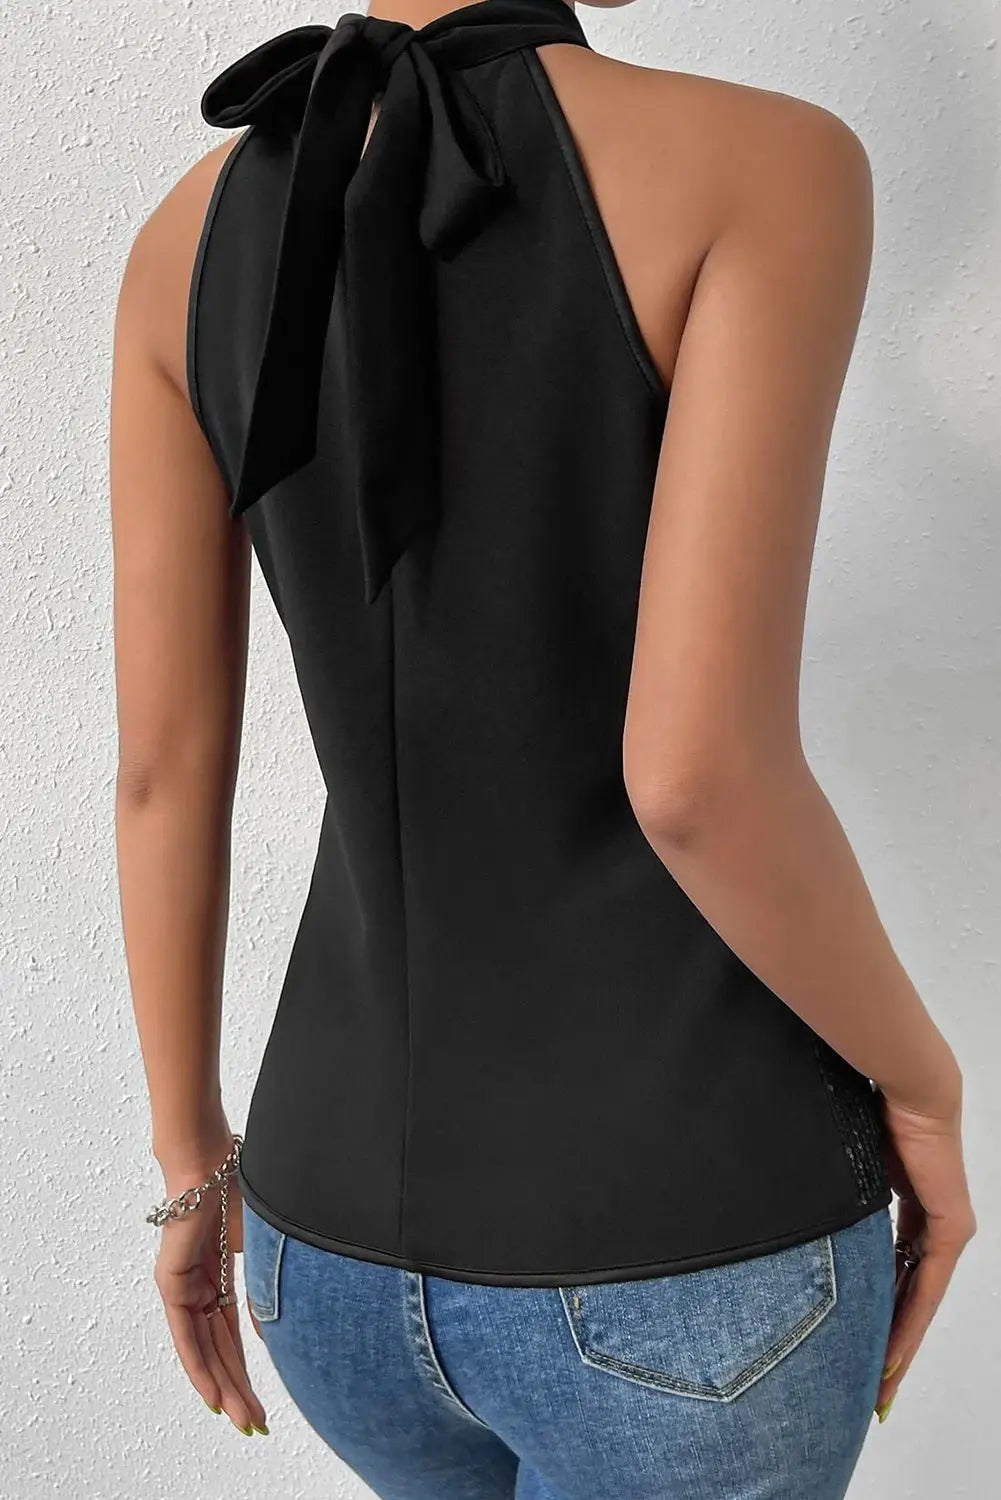 Black keyhole tie back sequined tank top - tops